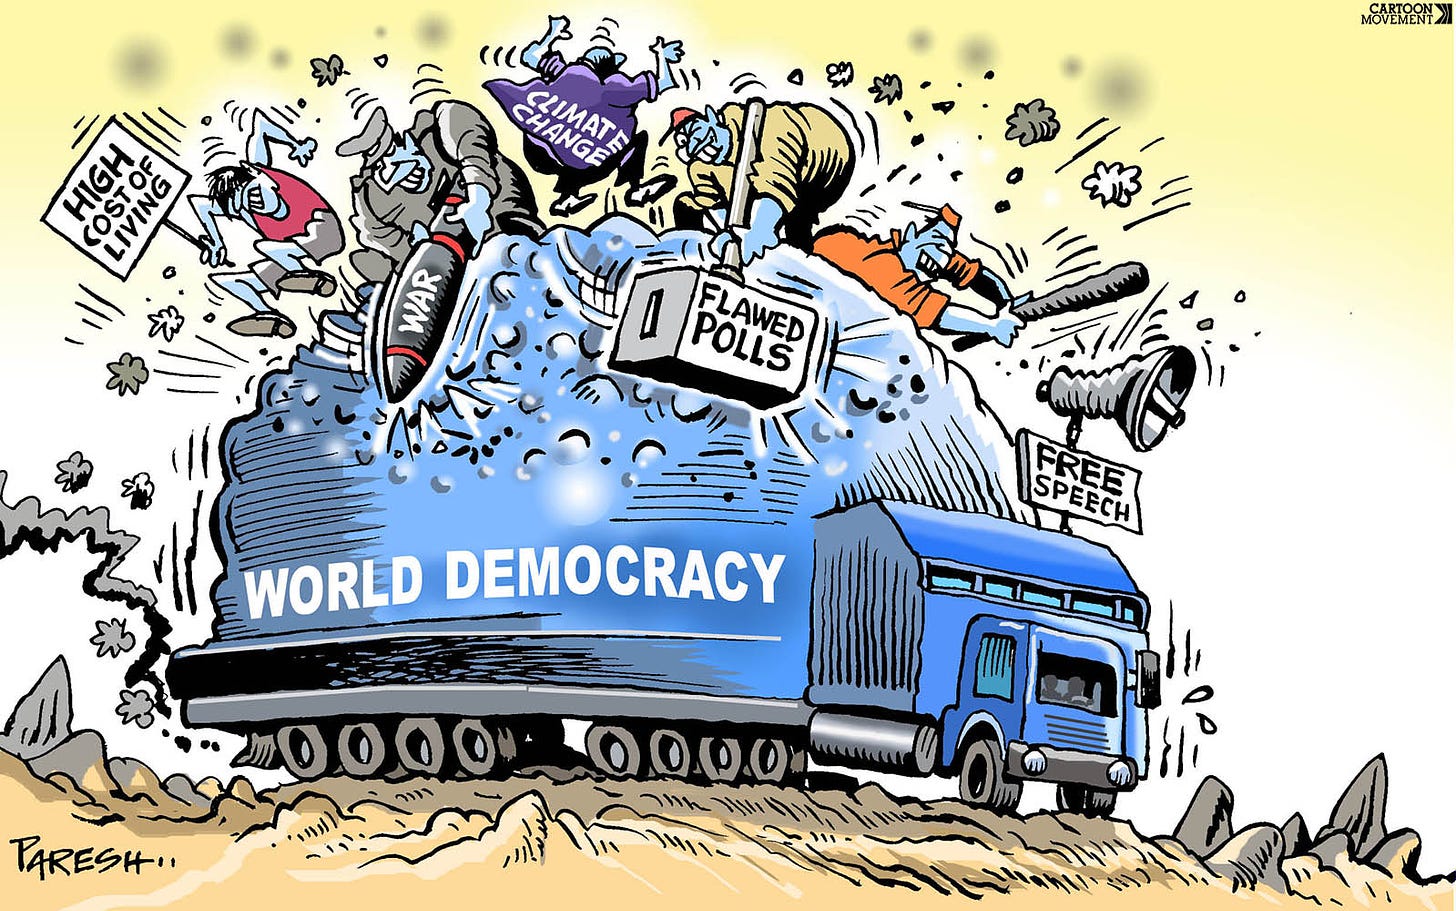 Cartoon showing a big truck labeled 'World democracies' that is under attack from people standing on its roof with big hammers labeled 'climate', 'flawed polls', 'climate change' and 'high cost of living'.